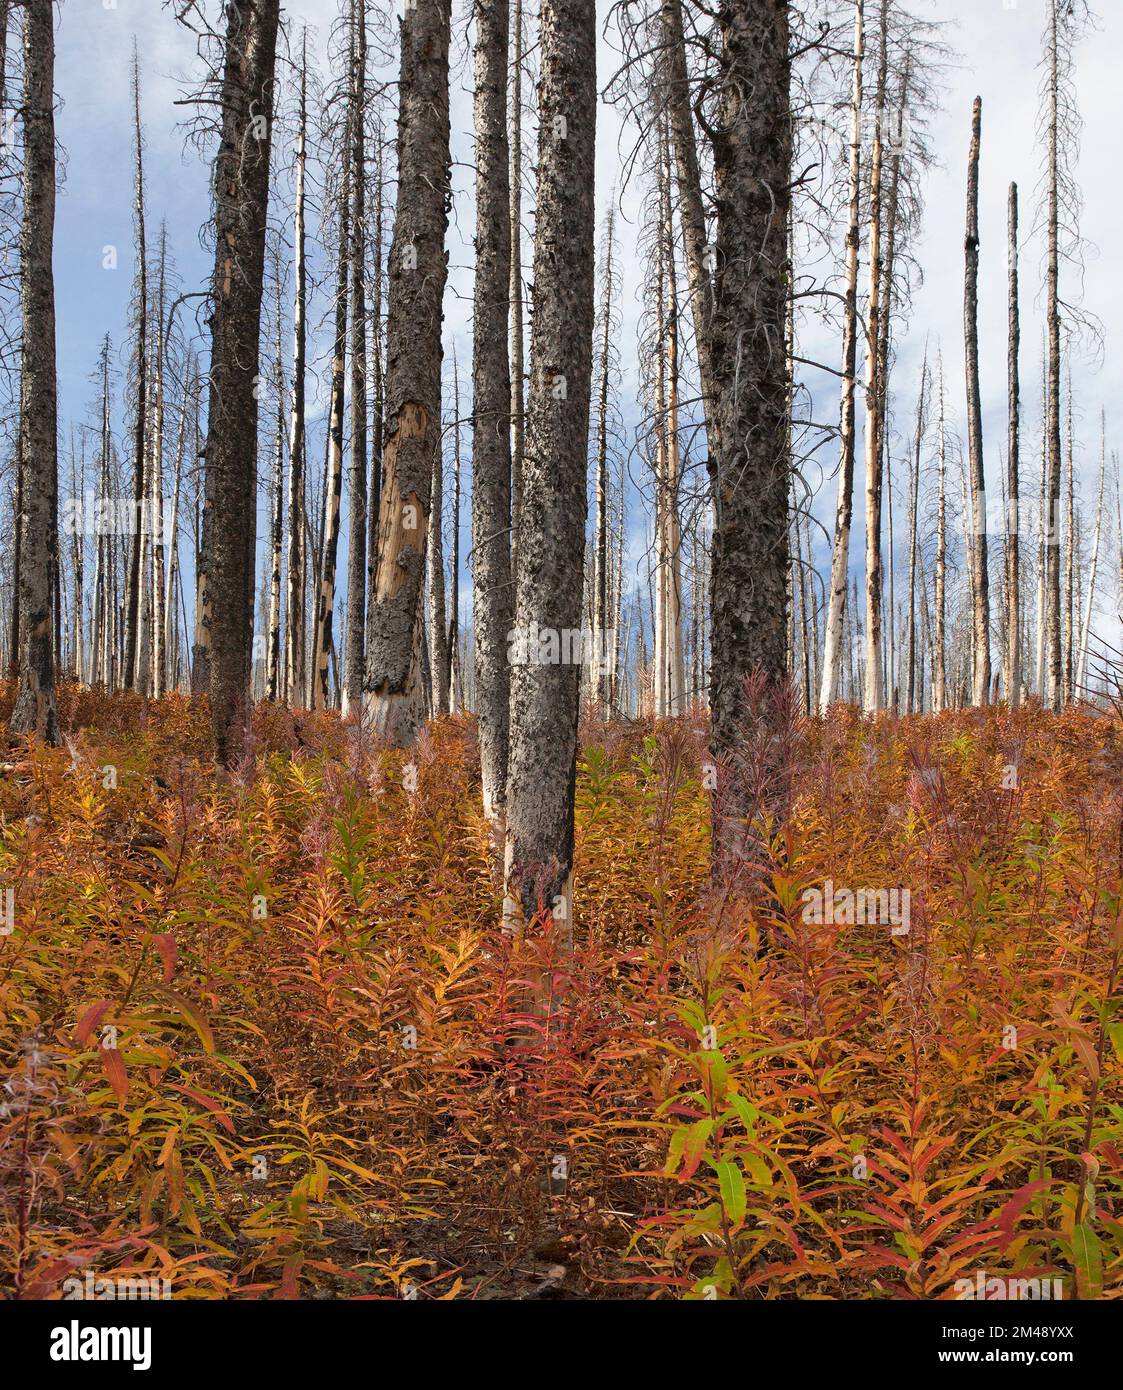 Fireweed growing in burned forest under dead trees killed by the Kenow wildfire, Waterton Lakes National Park, Canada. Epilobium angustifolium Stock Photo